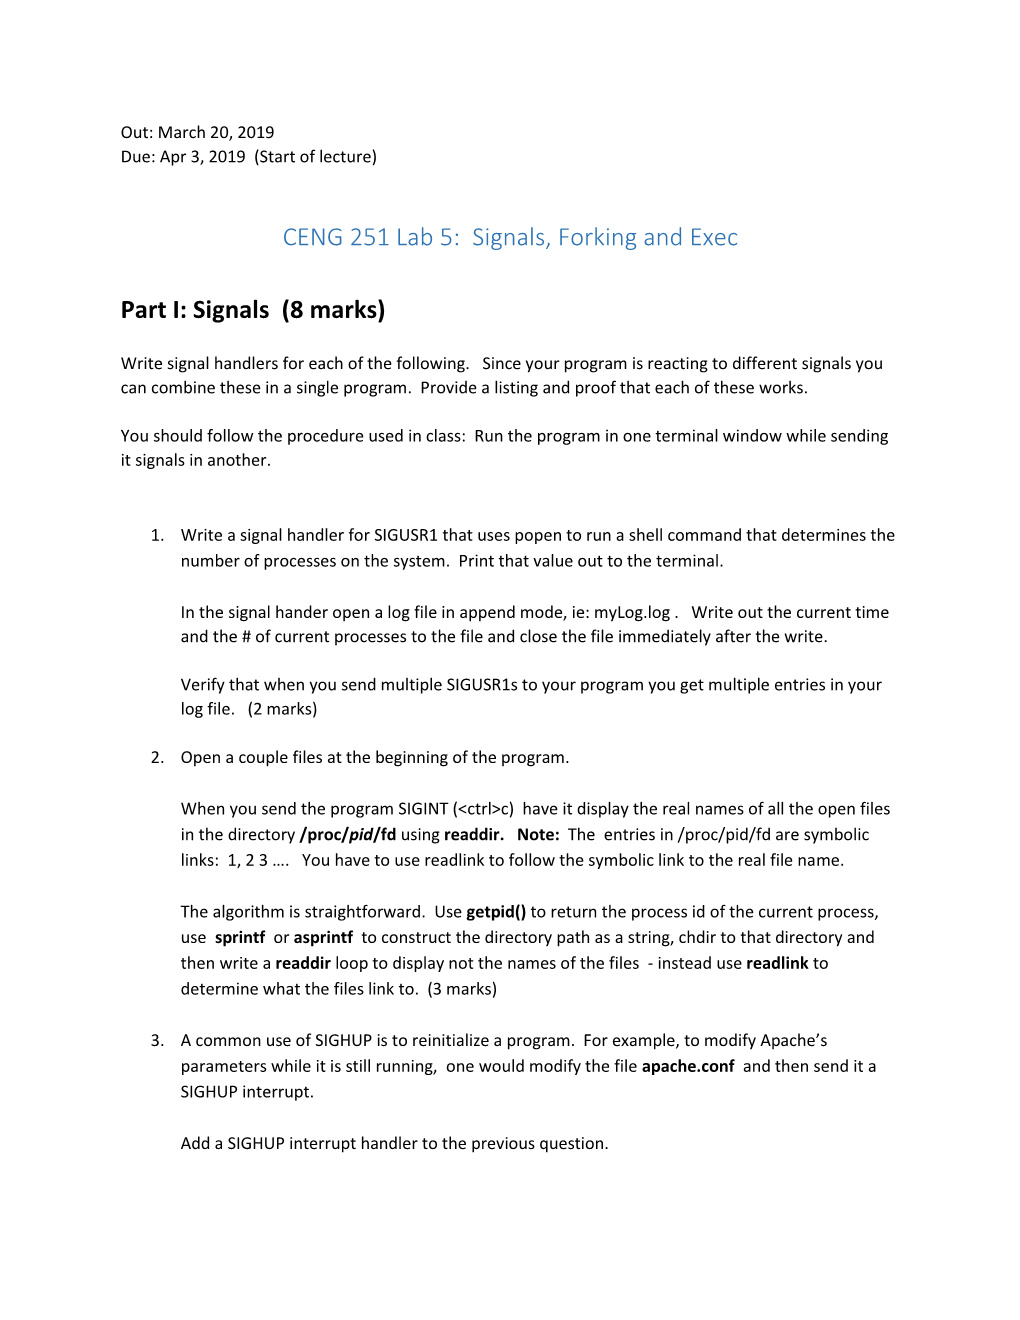 CENG 251 Lab 5: Signals, Forking and Exec Part I: Signals (8 Marks)